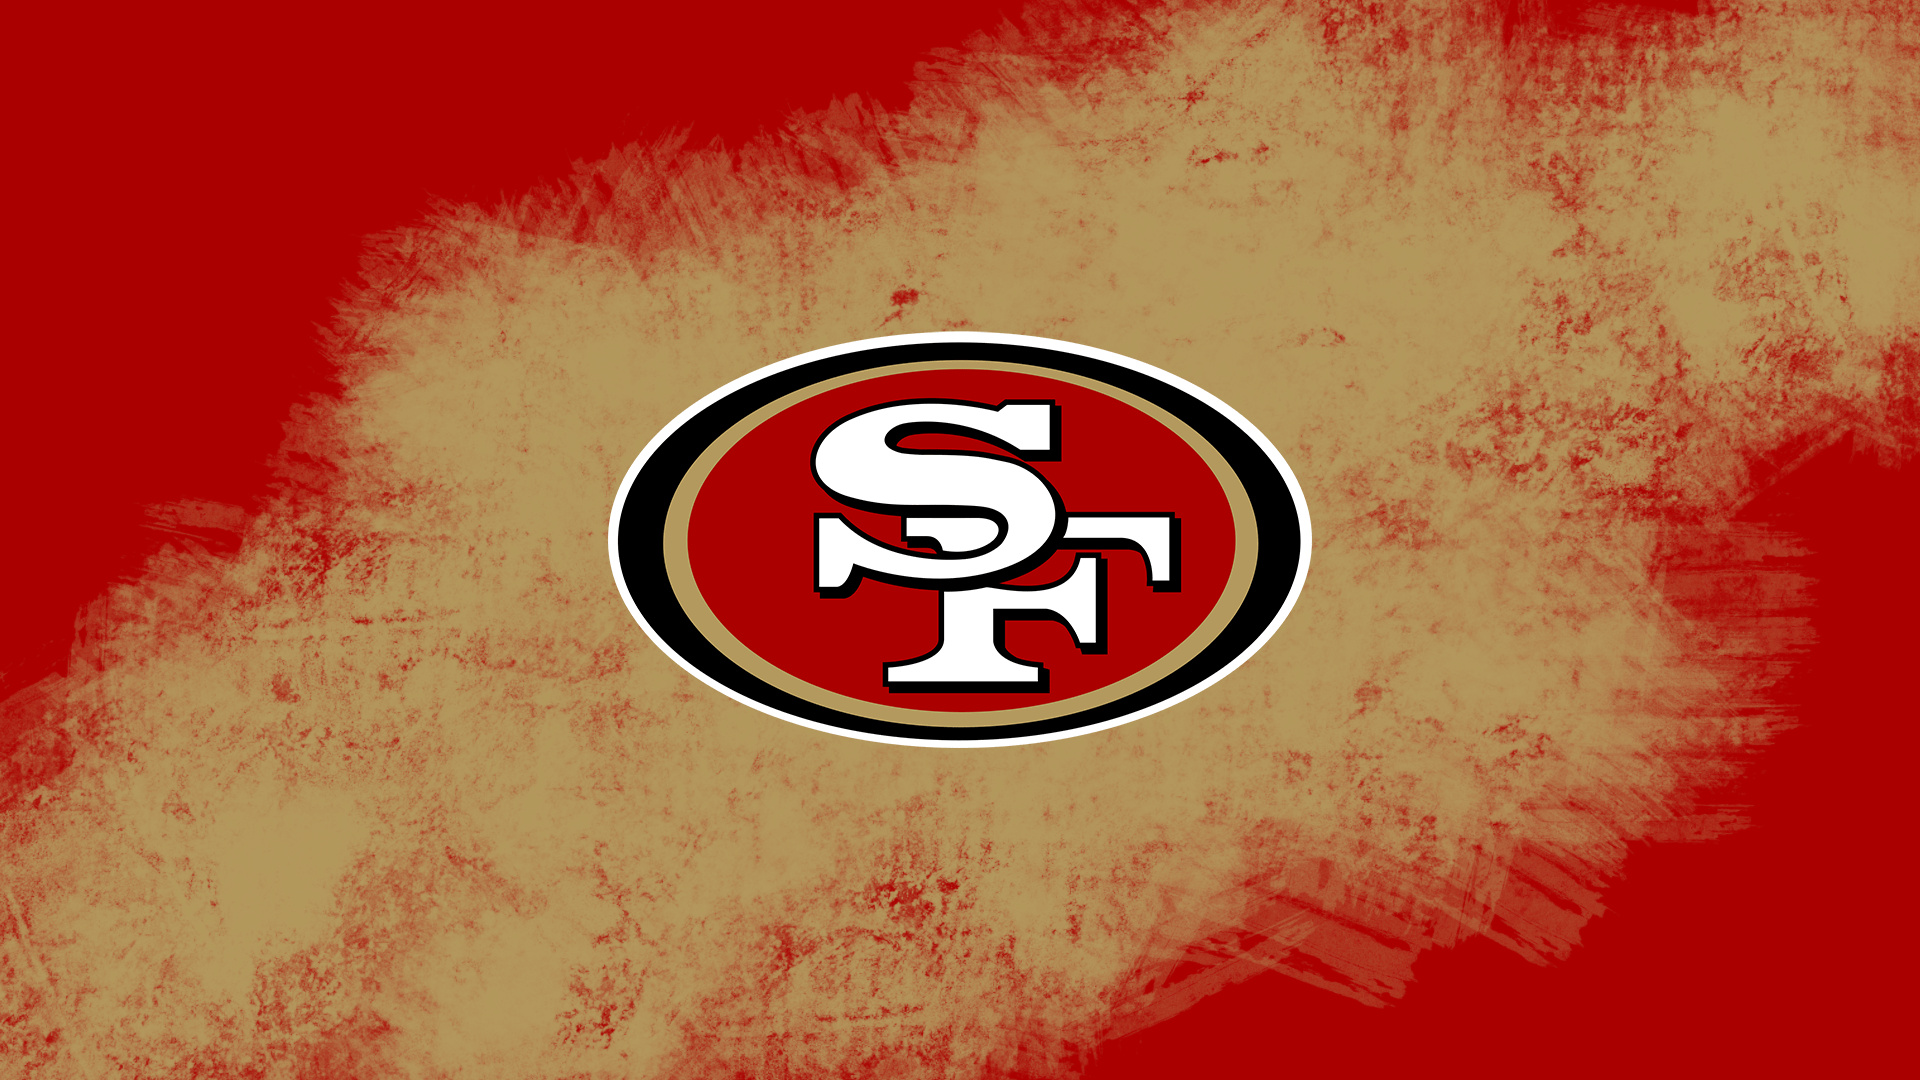 49ers wallpaper, Nabpic, High-quality backgrounds, Sports themes, 1920x1080 Full HD Desktop